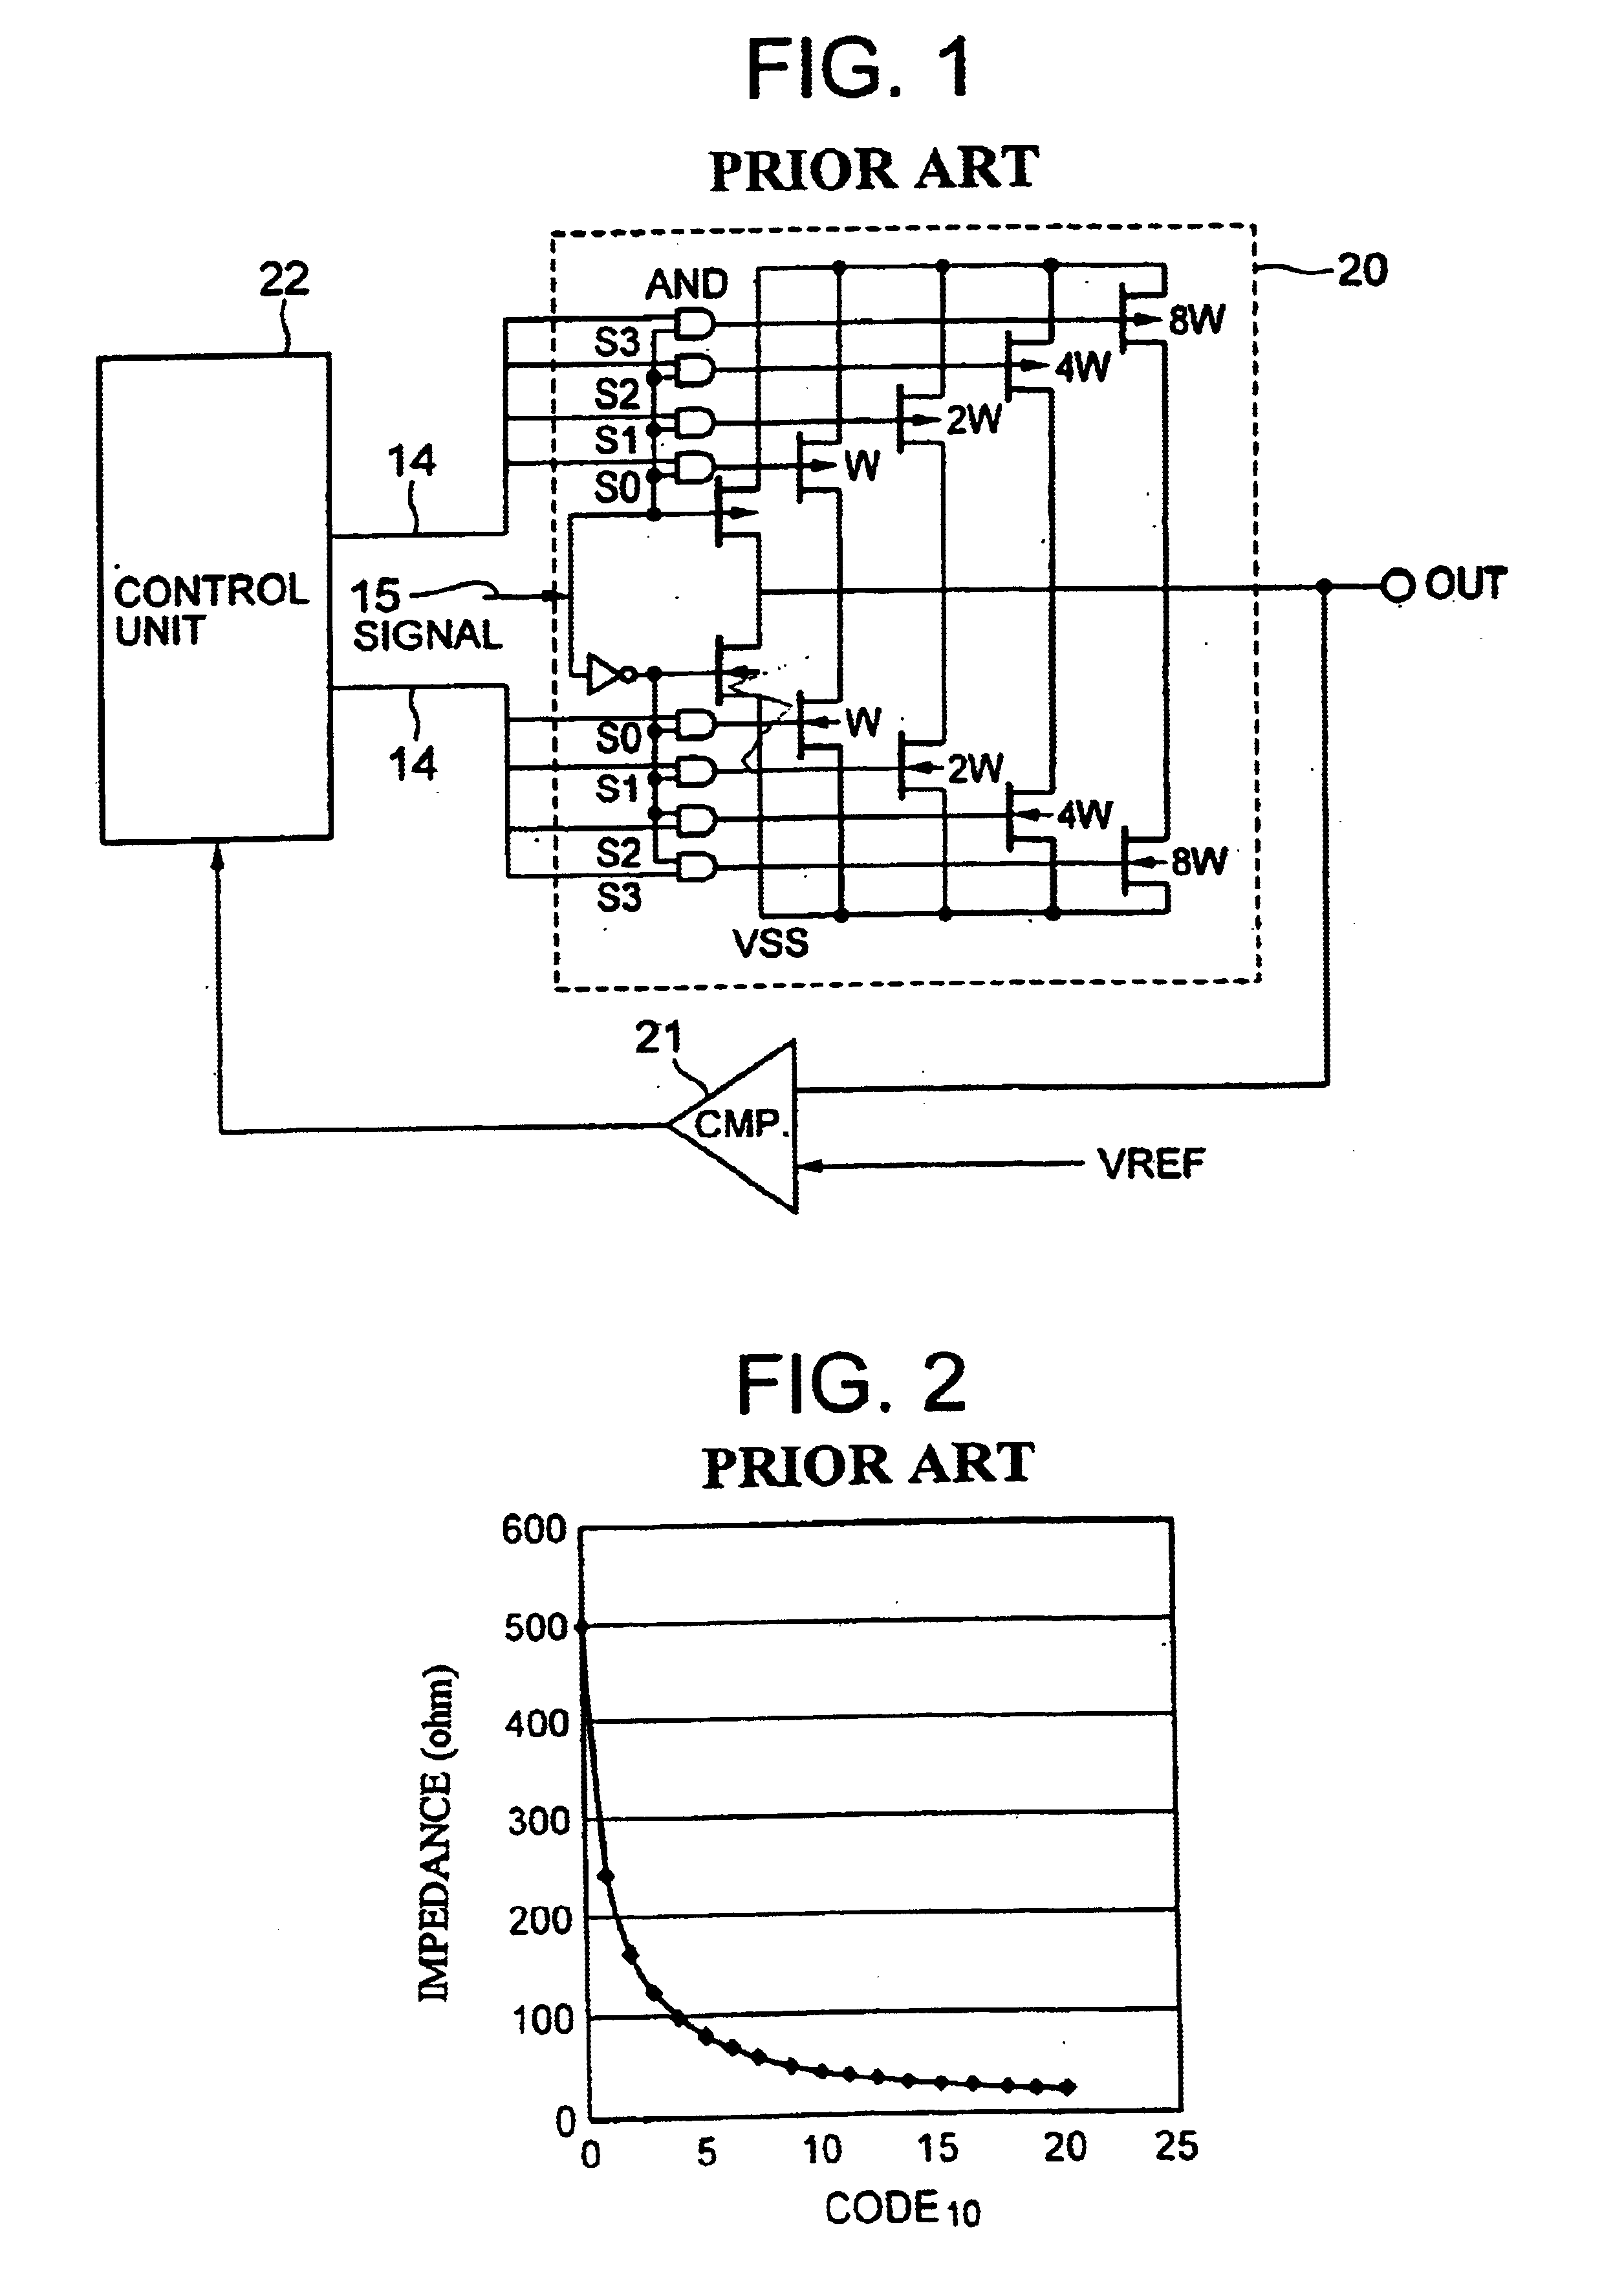 Variable impedance circuit